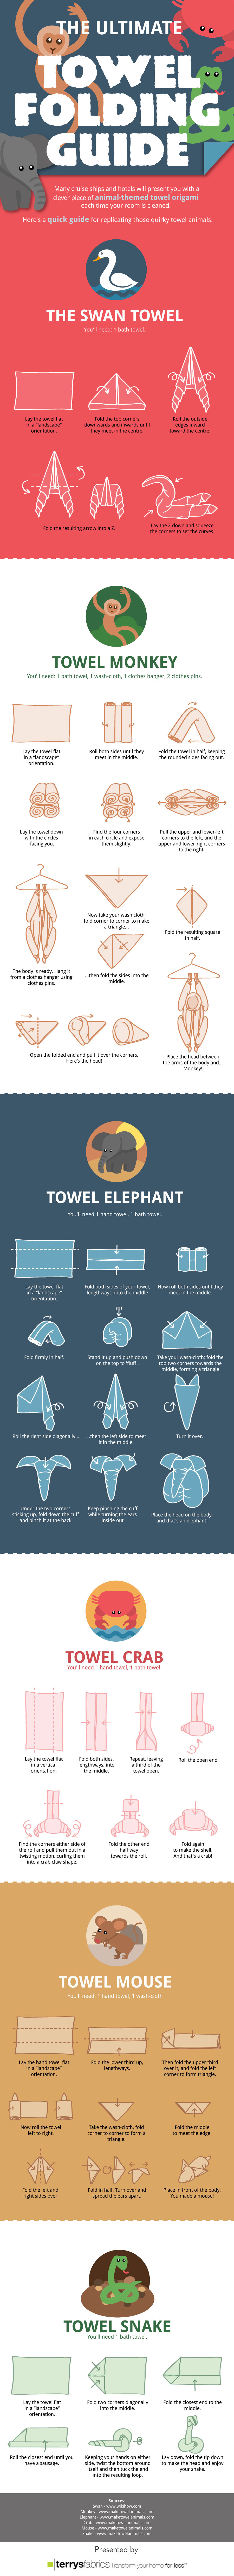 The Ultimate Towel Folding Guide